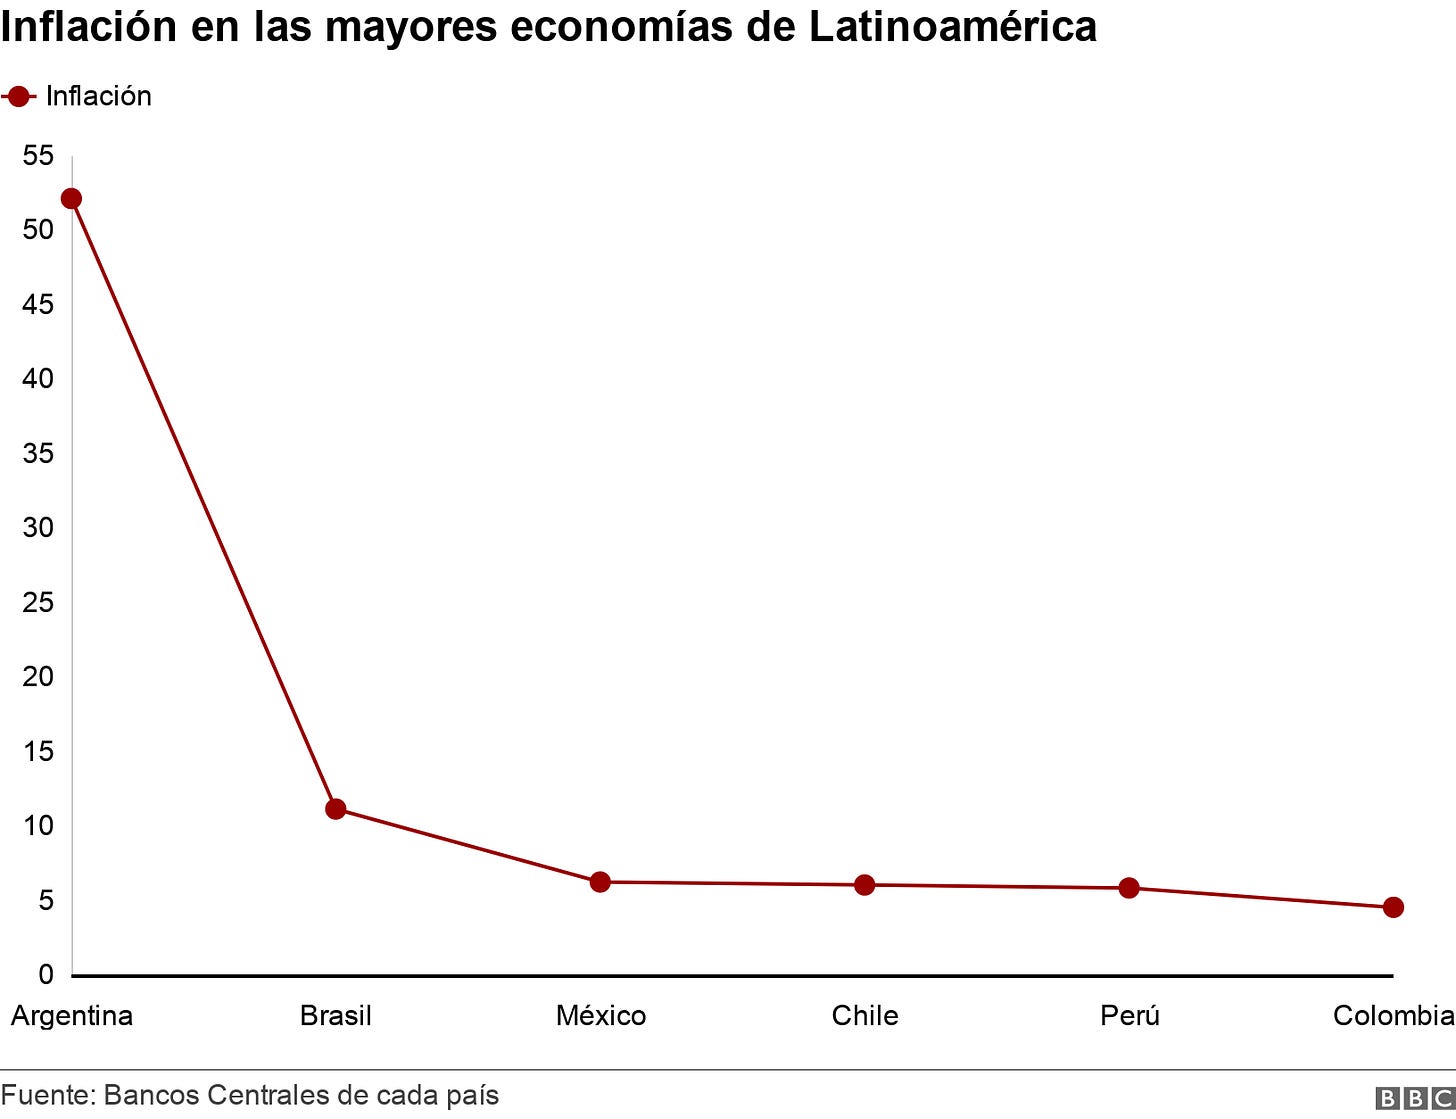 Inflation in the largest economies in Latin America. . .